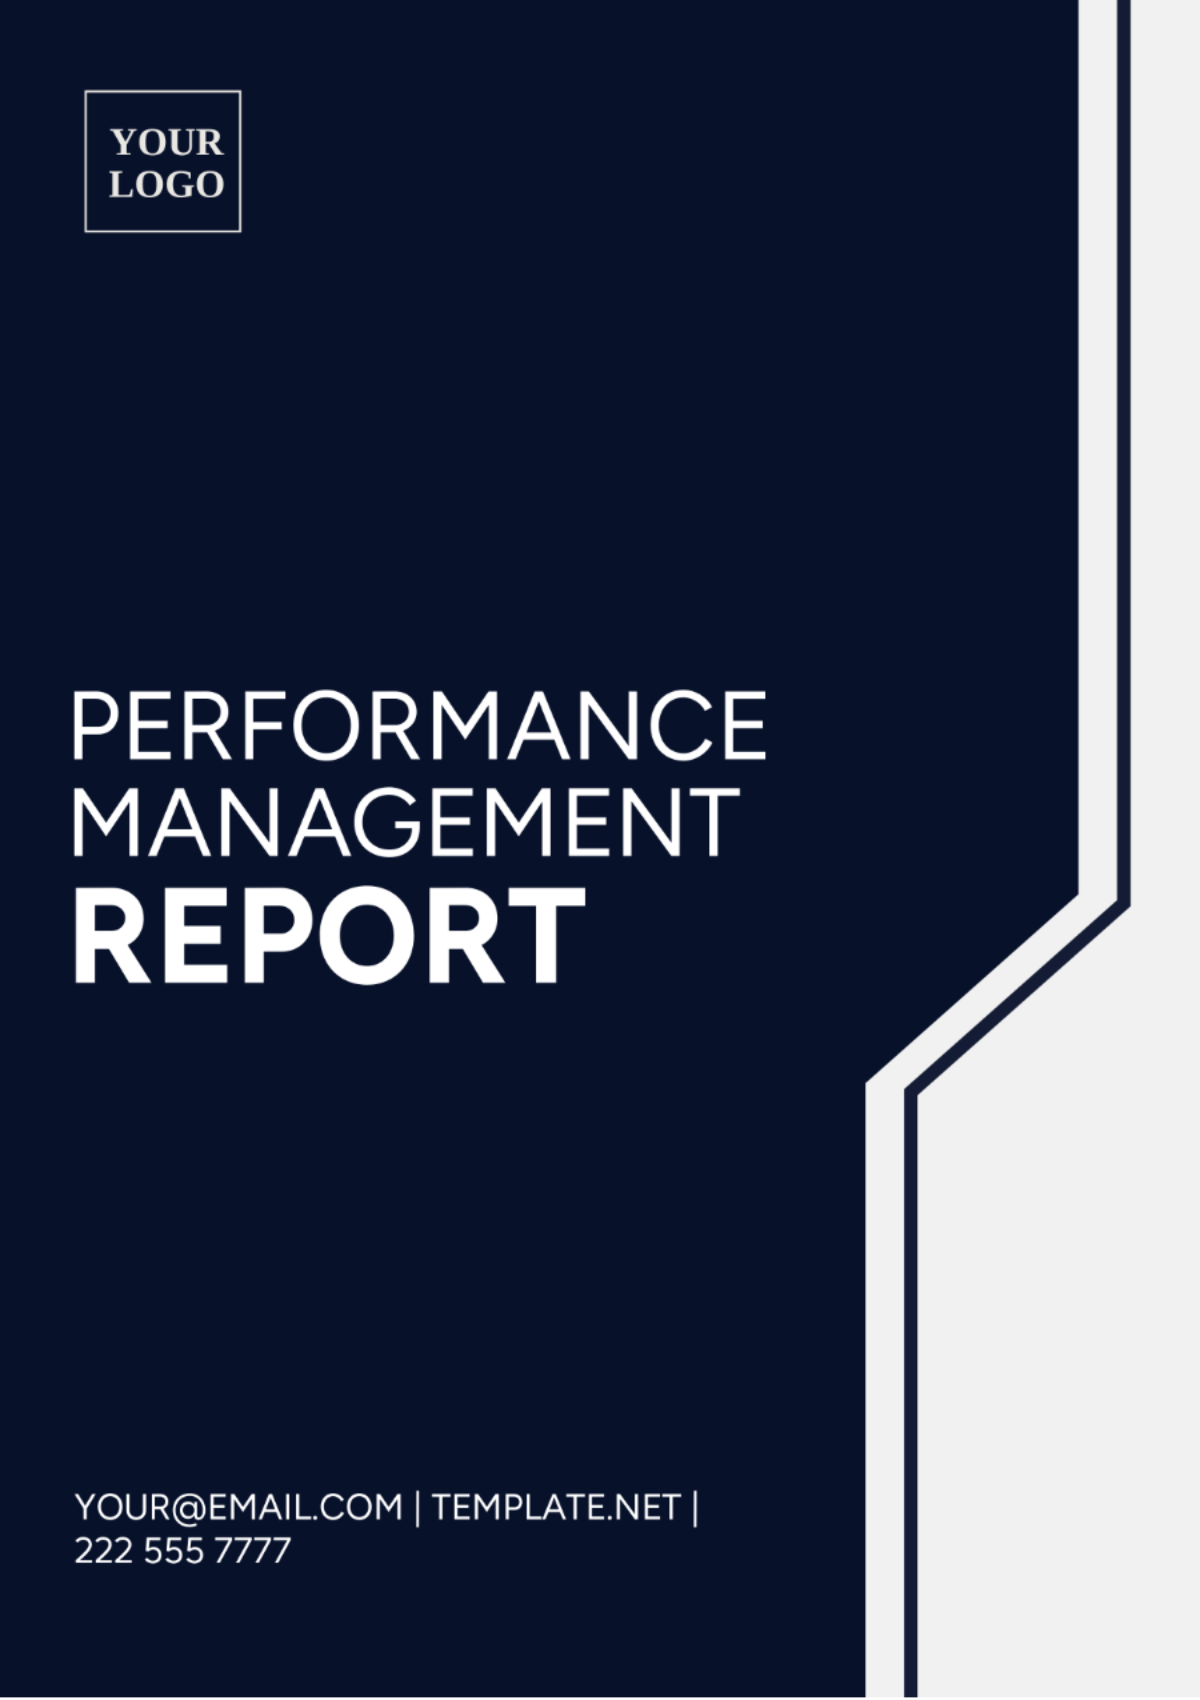 Performance Management Report Template